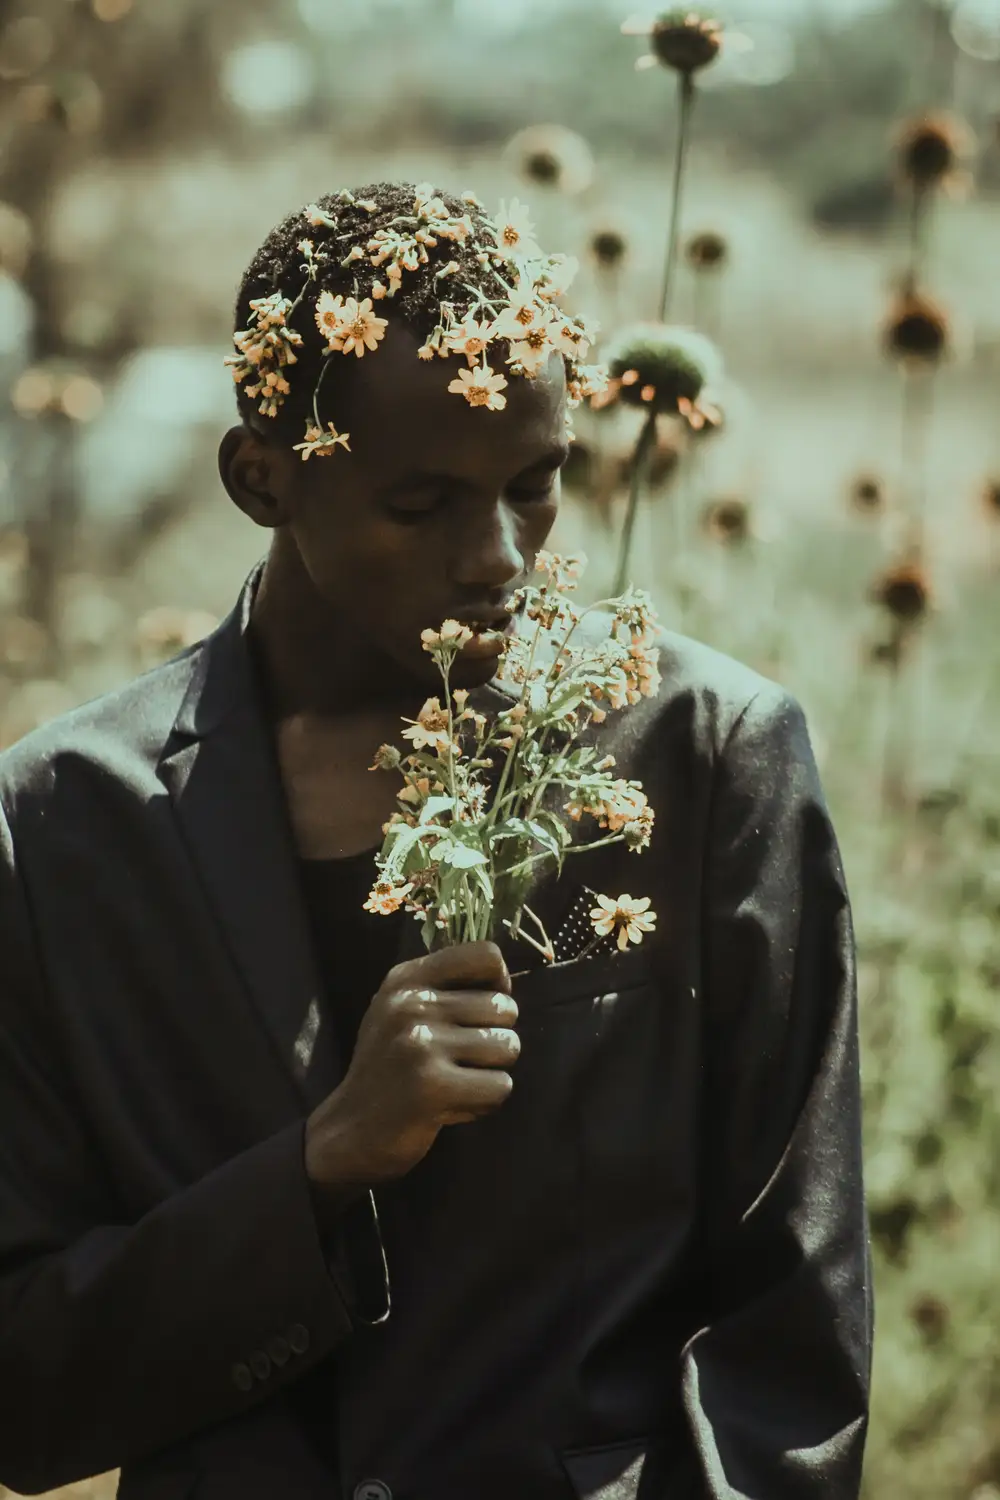 Guy smelling some flowers